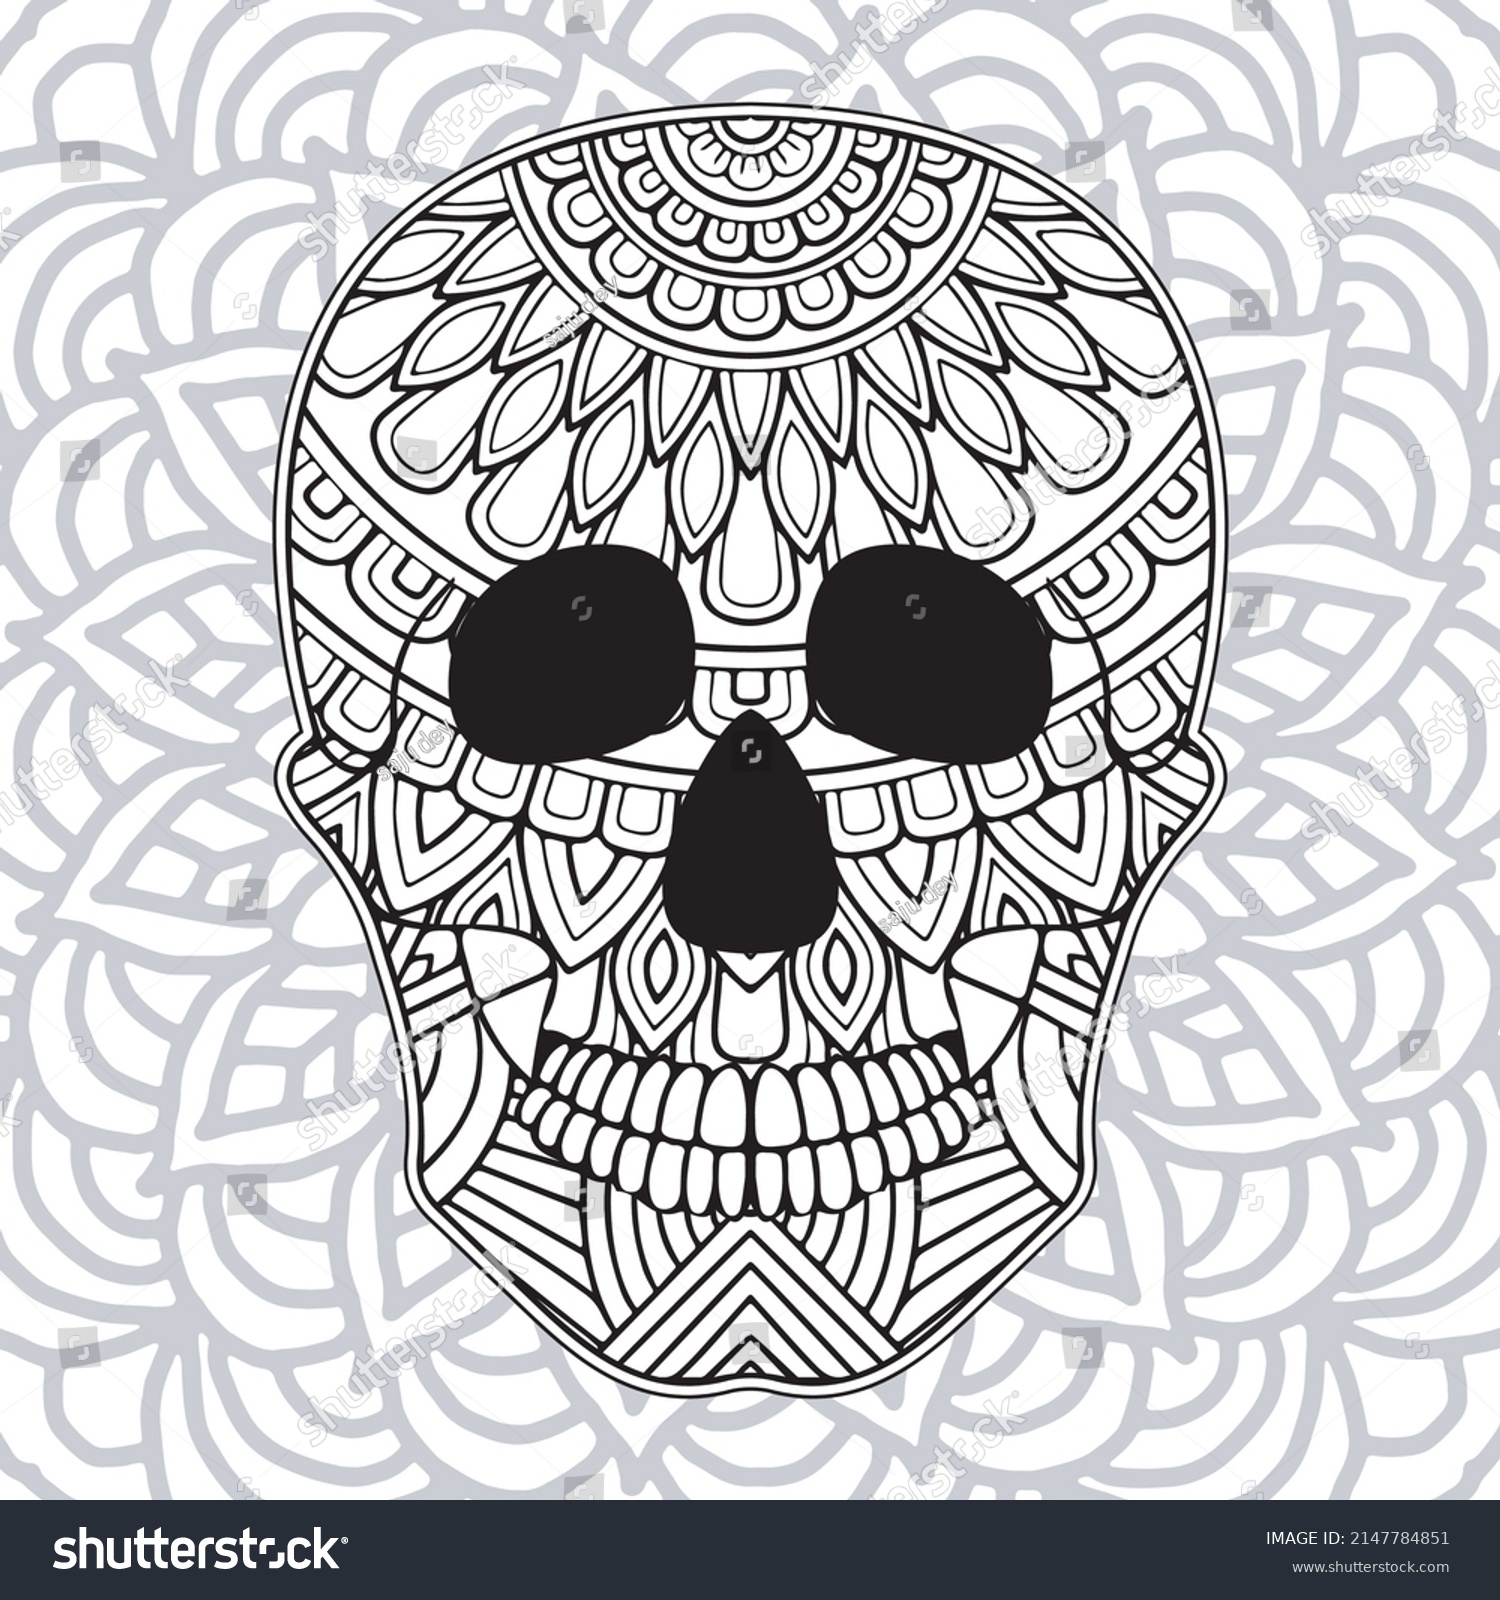 SVG of Day of the Dead Coloring for adult.
Mexican sugar skull, svg